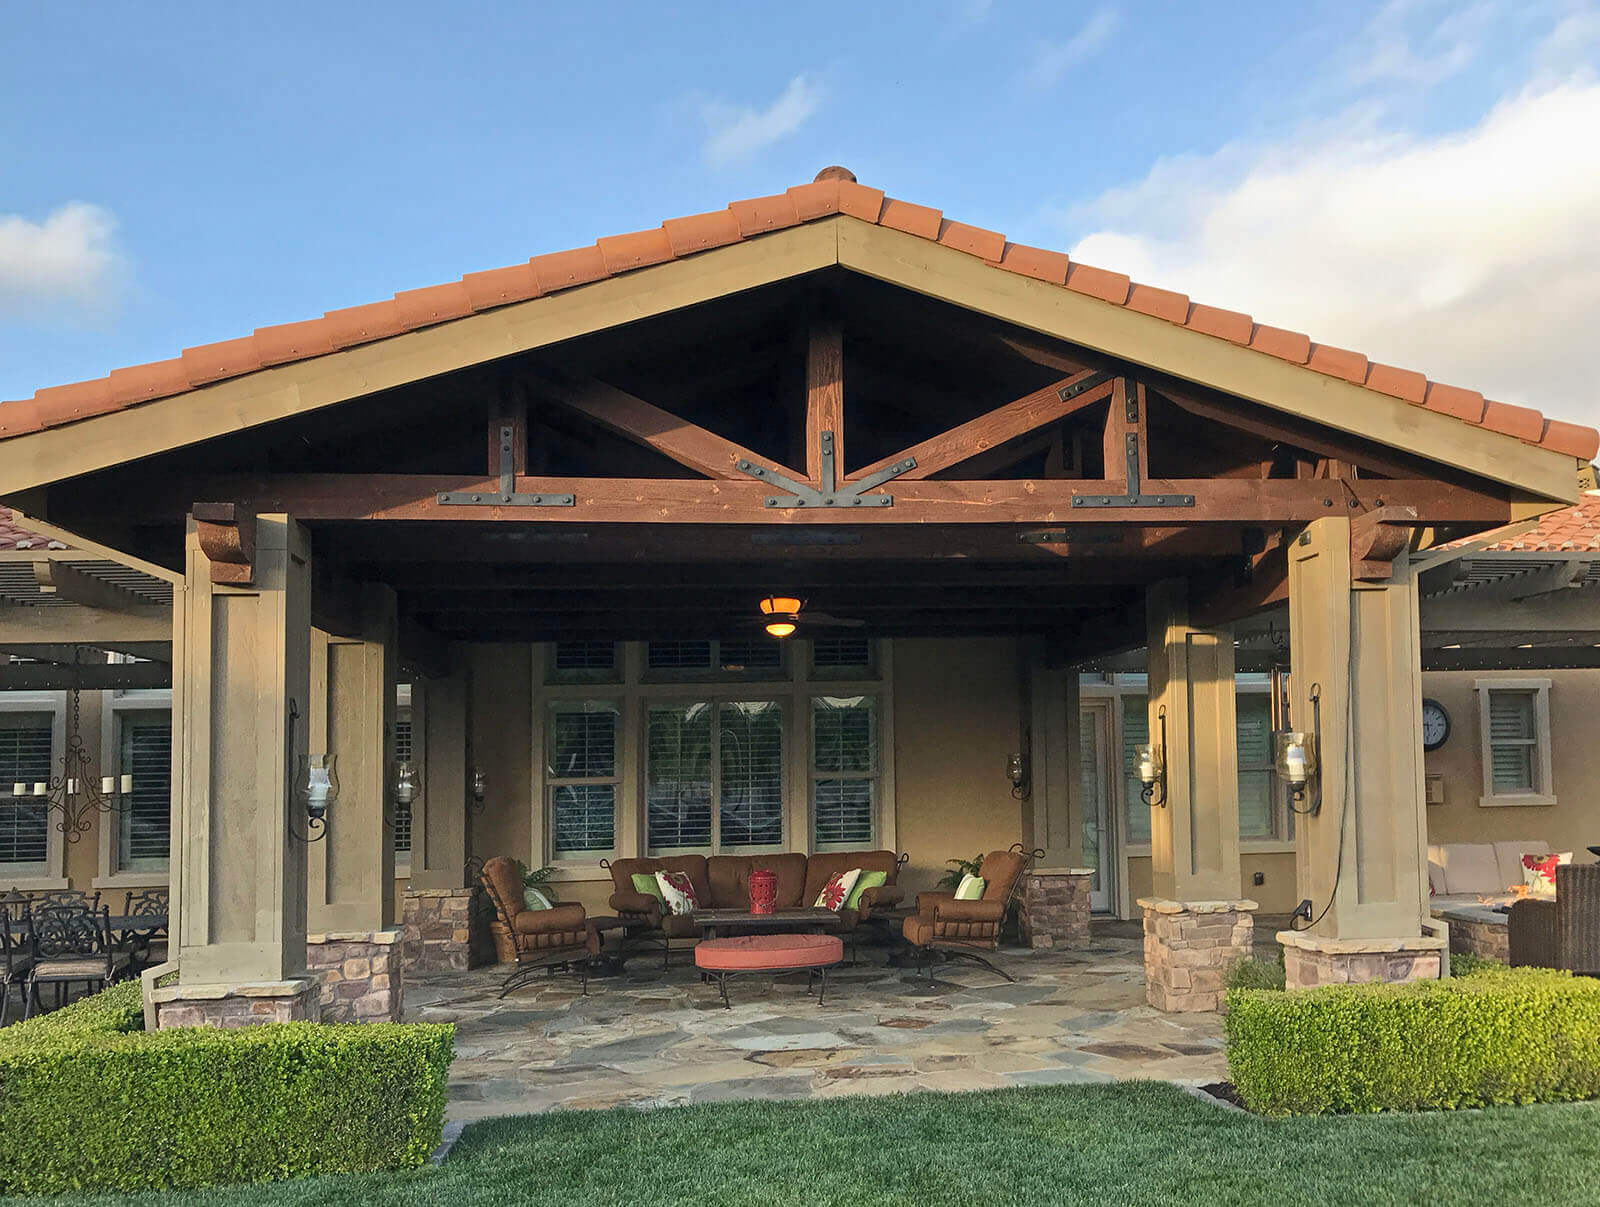 Pergola with Mission-style tile roof, wood rafters and columns shelters an outdoor lounge on a flagstone patio